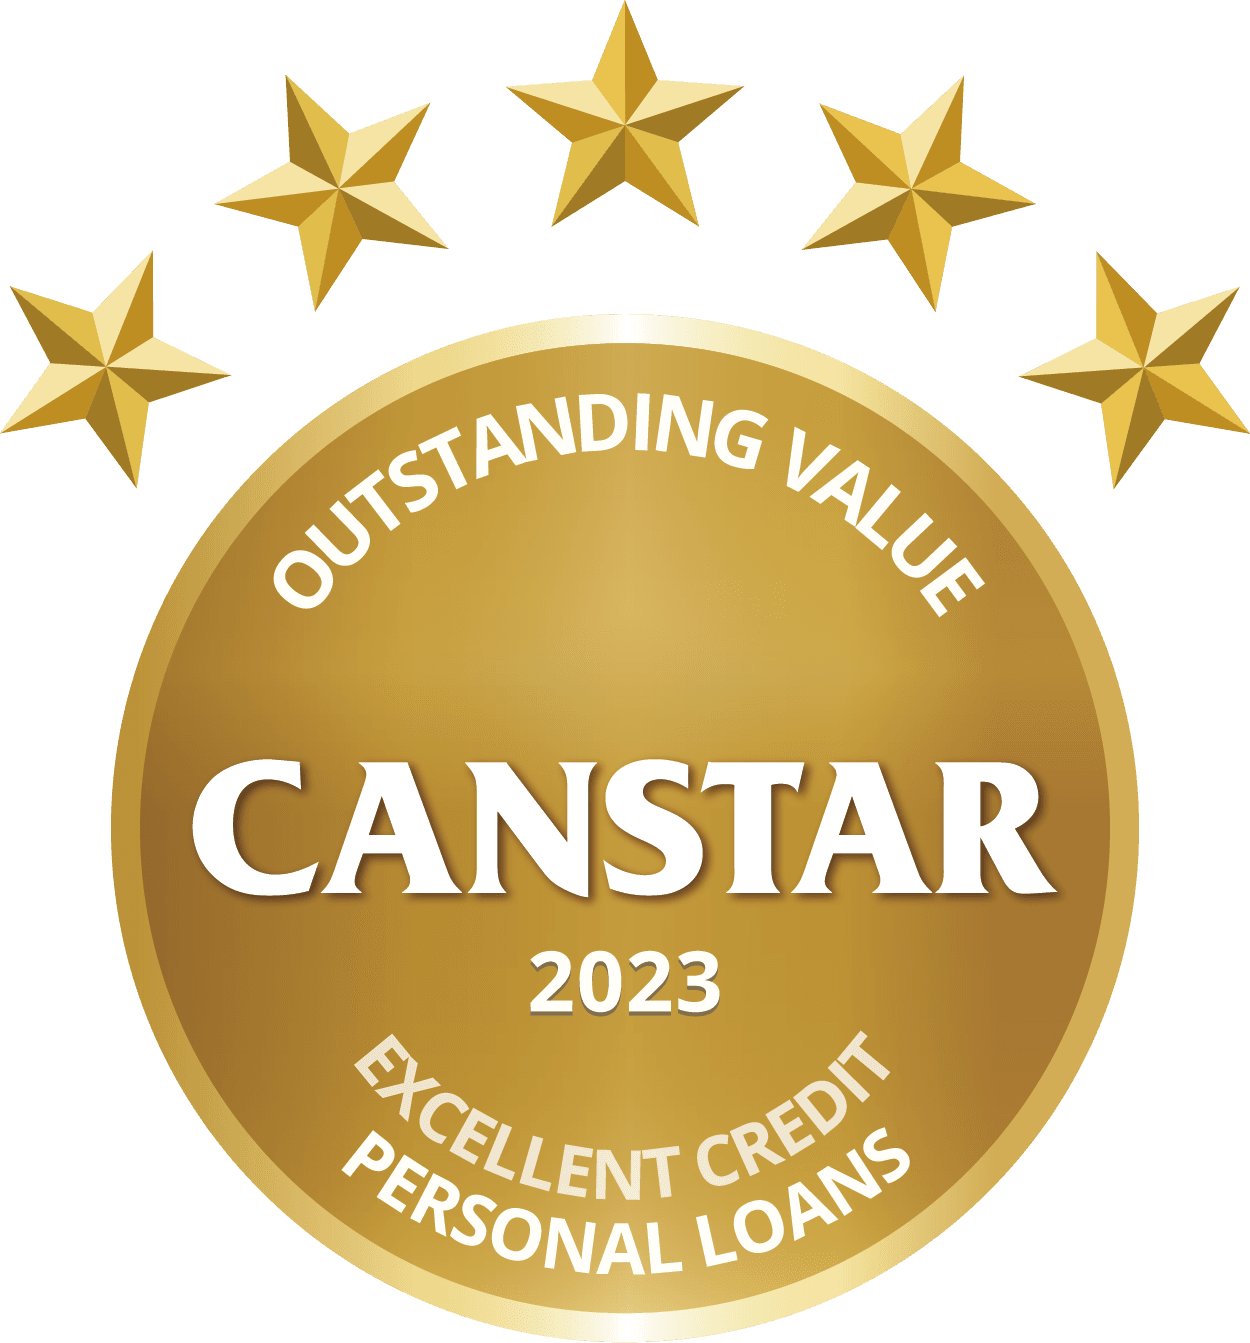 CANSTAR 2023 - Outstanding Value. Excellent Credit Personal Loans